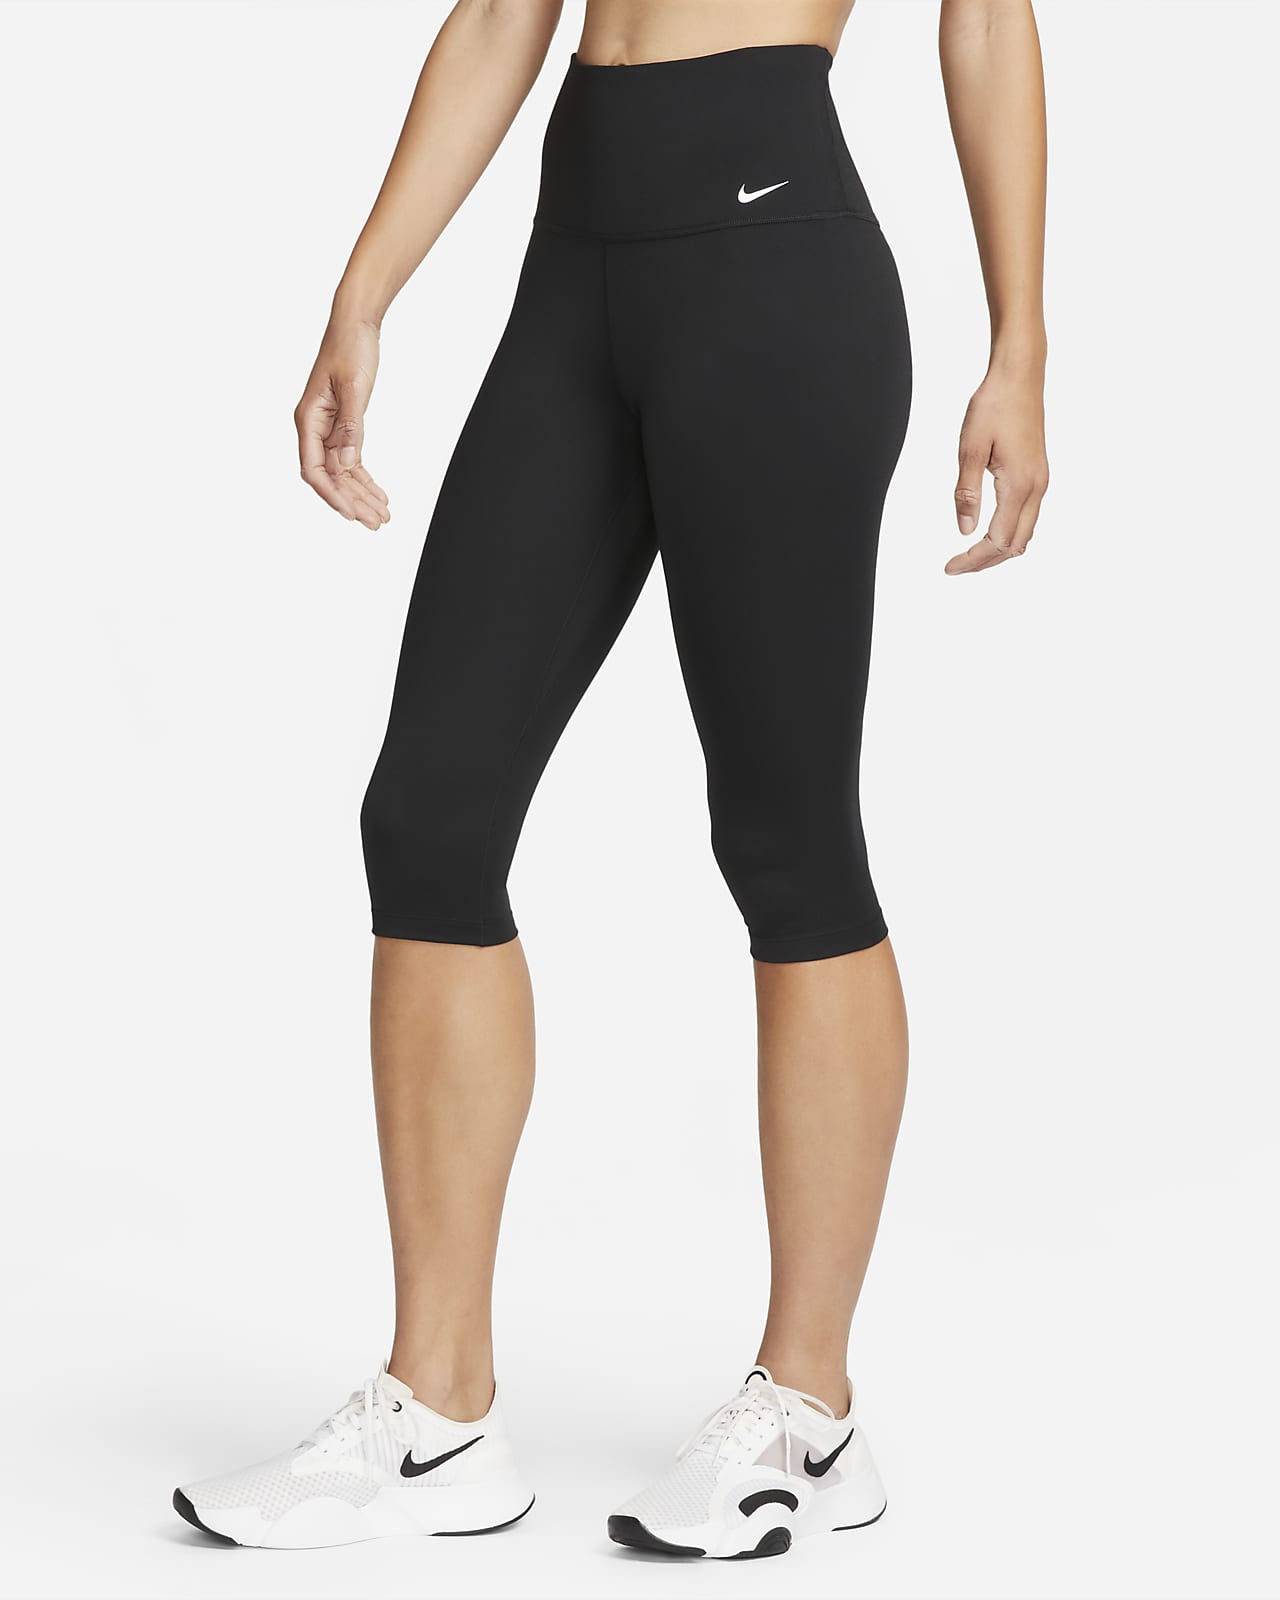 https://static.nike.com/a/images/t_PDP_1280_v1/f_auto,q_auto:eco/bb1c8b14-1caa-4f56-8a82-d5411d5d74ae/legging-corsaire-taille-haute-one-pour-6xg4fd.png